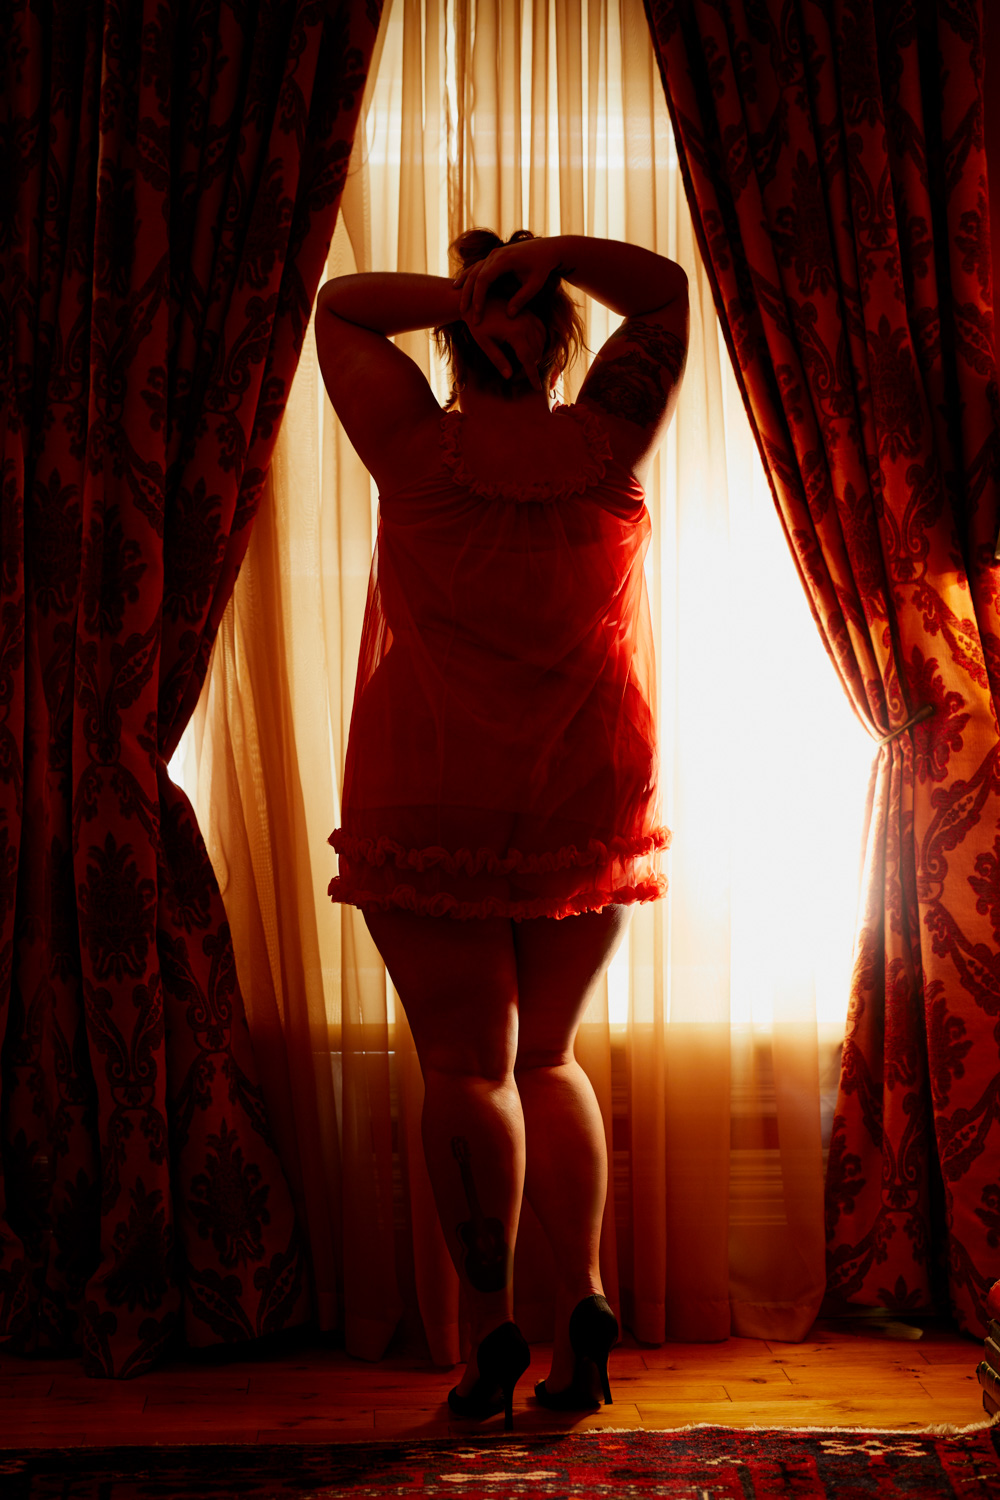 21-best-toronto-boudoir-photographer-unabashed-beauty-classy-hotel-glamourous-barrie-photography-sexy-inimate-lifestyle-photos-red-robe-see-through-nude-naked-bed-lingerie-stockings-garter-belt-thong-pose-pictures-beautiful-unabashed-beauty-private.jpg